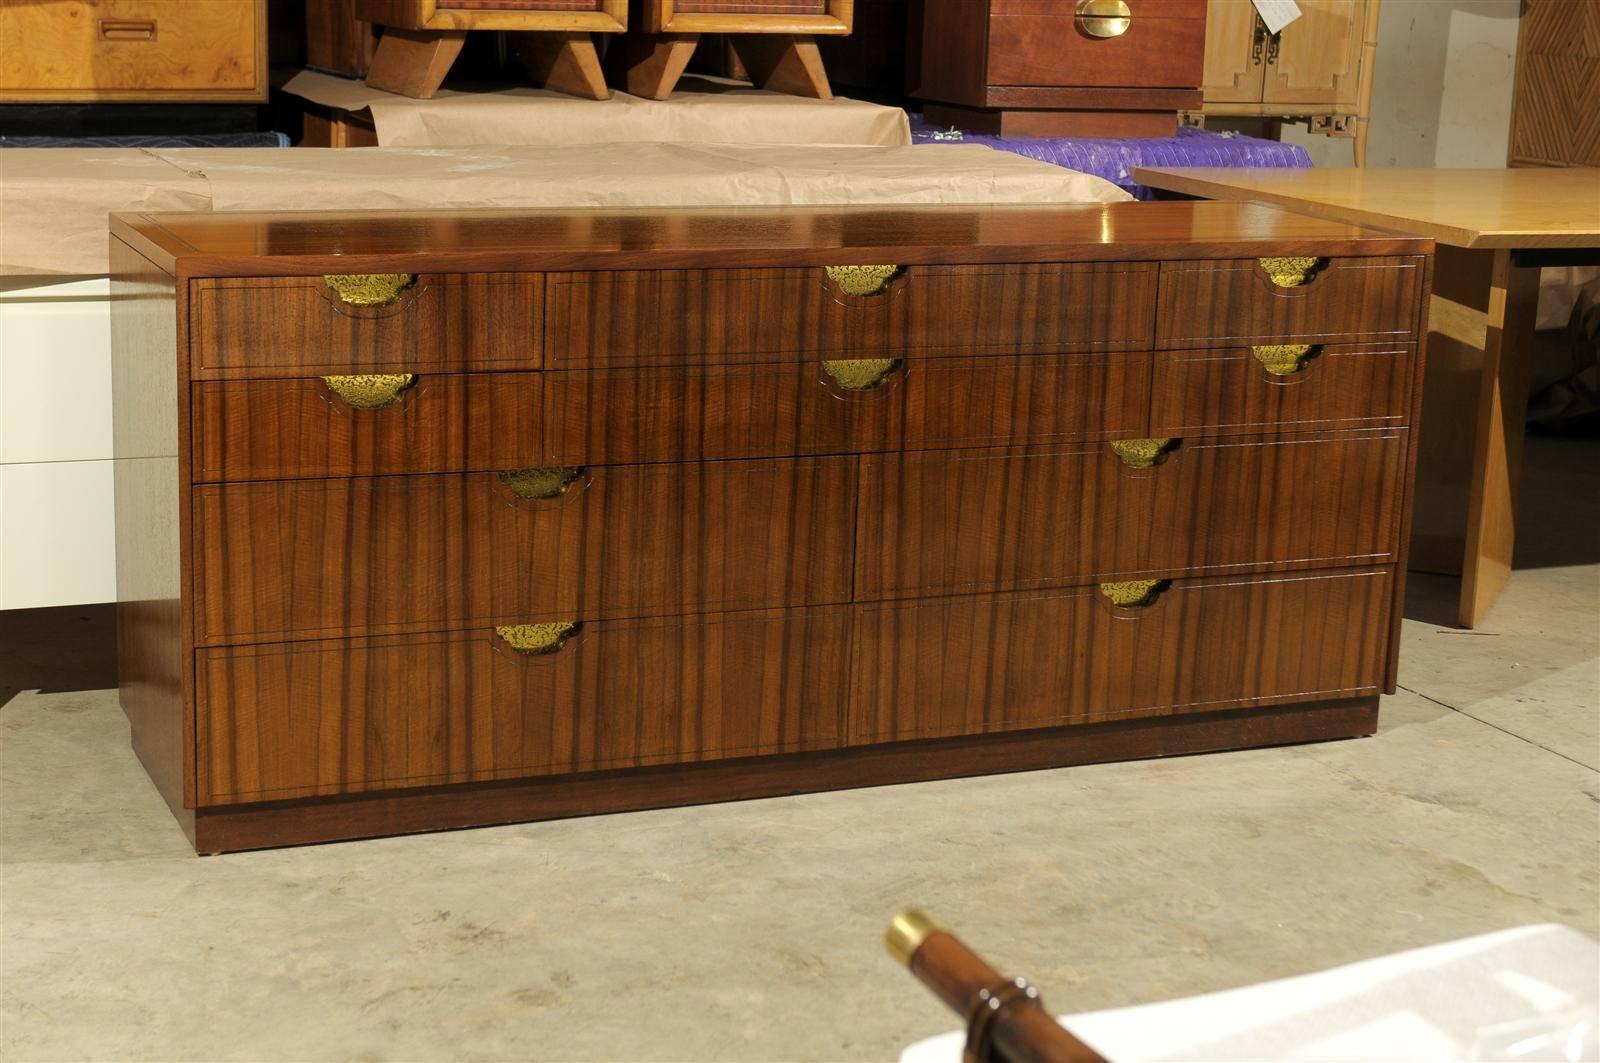 An absolutely stunning modern ten-drawer chest by Baker, circa 1980. Evidently from a limited production series, as research can find no examples like it. Stout, exquisitely crafted walnut case construction. The veneer displays a dramatic zebra-like